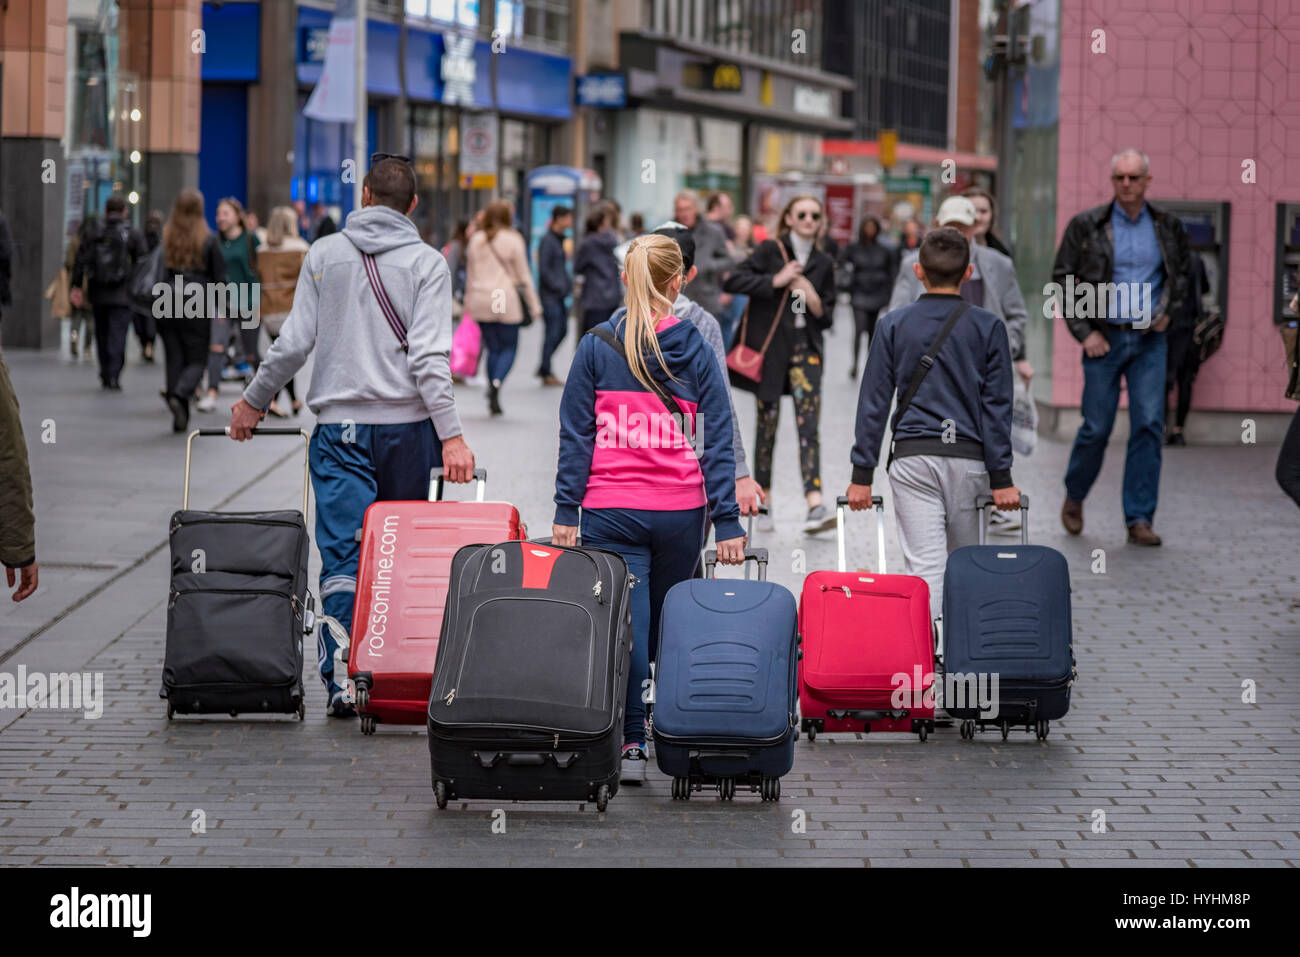 A family pulling suitcases through the street. Stock Photo